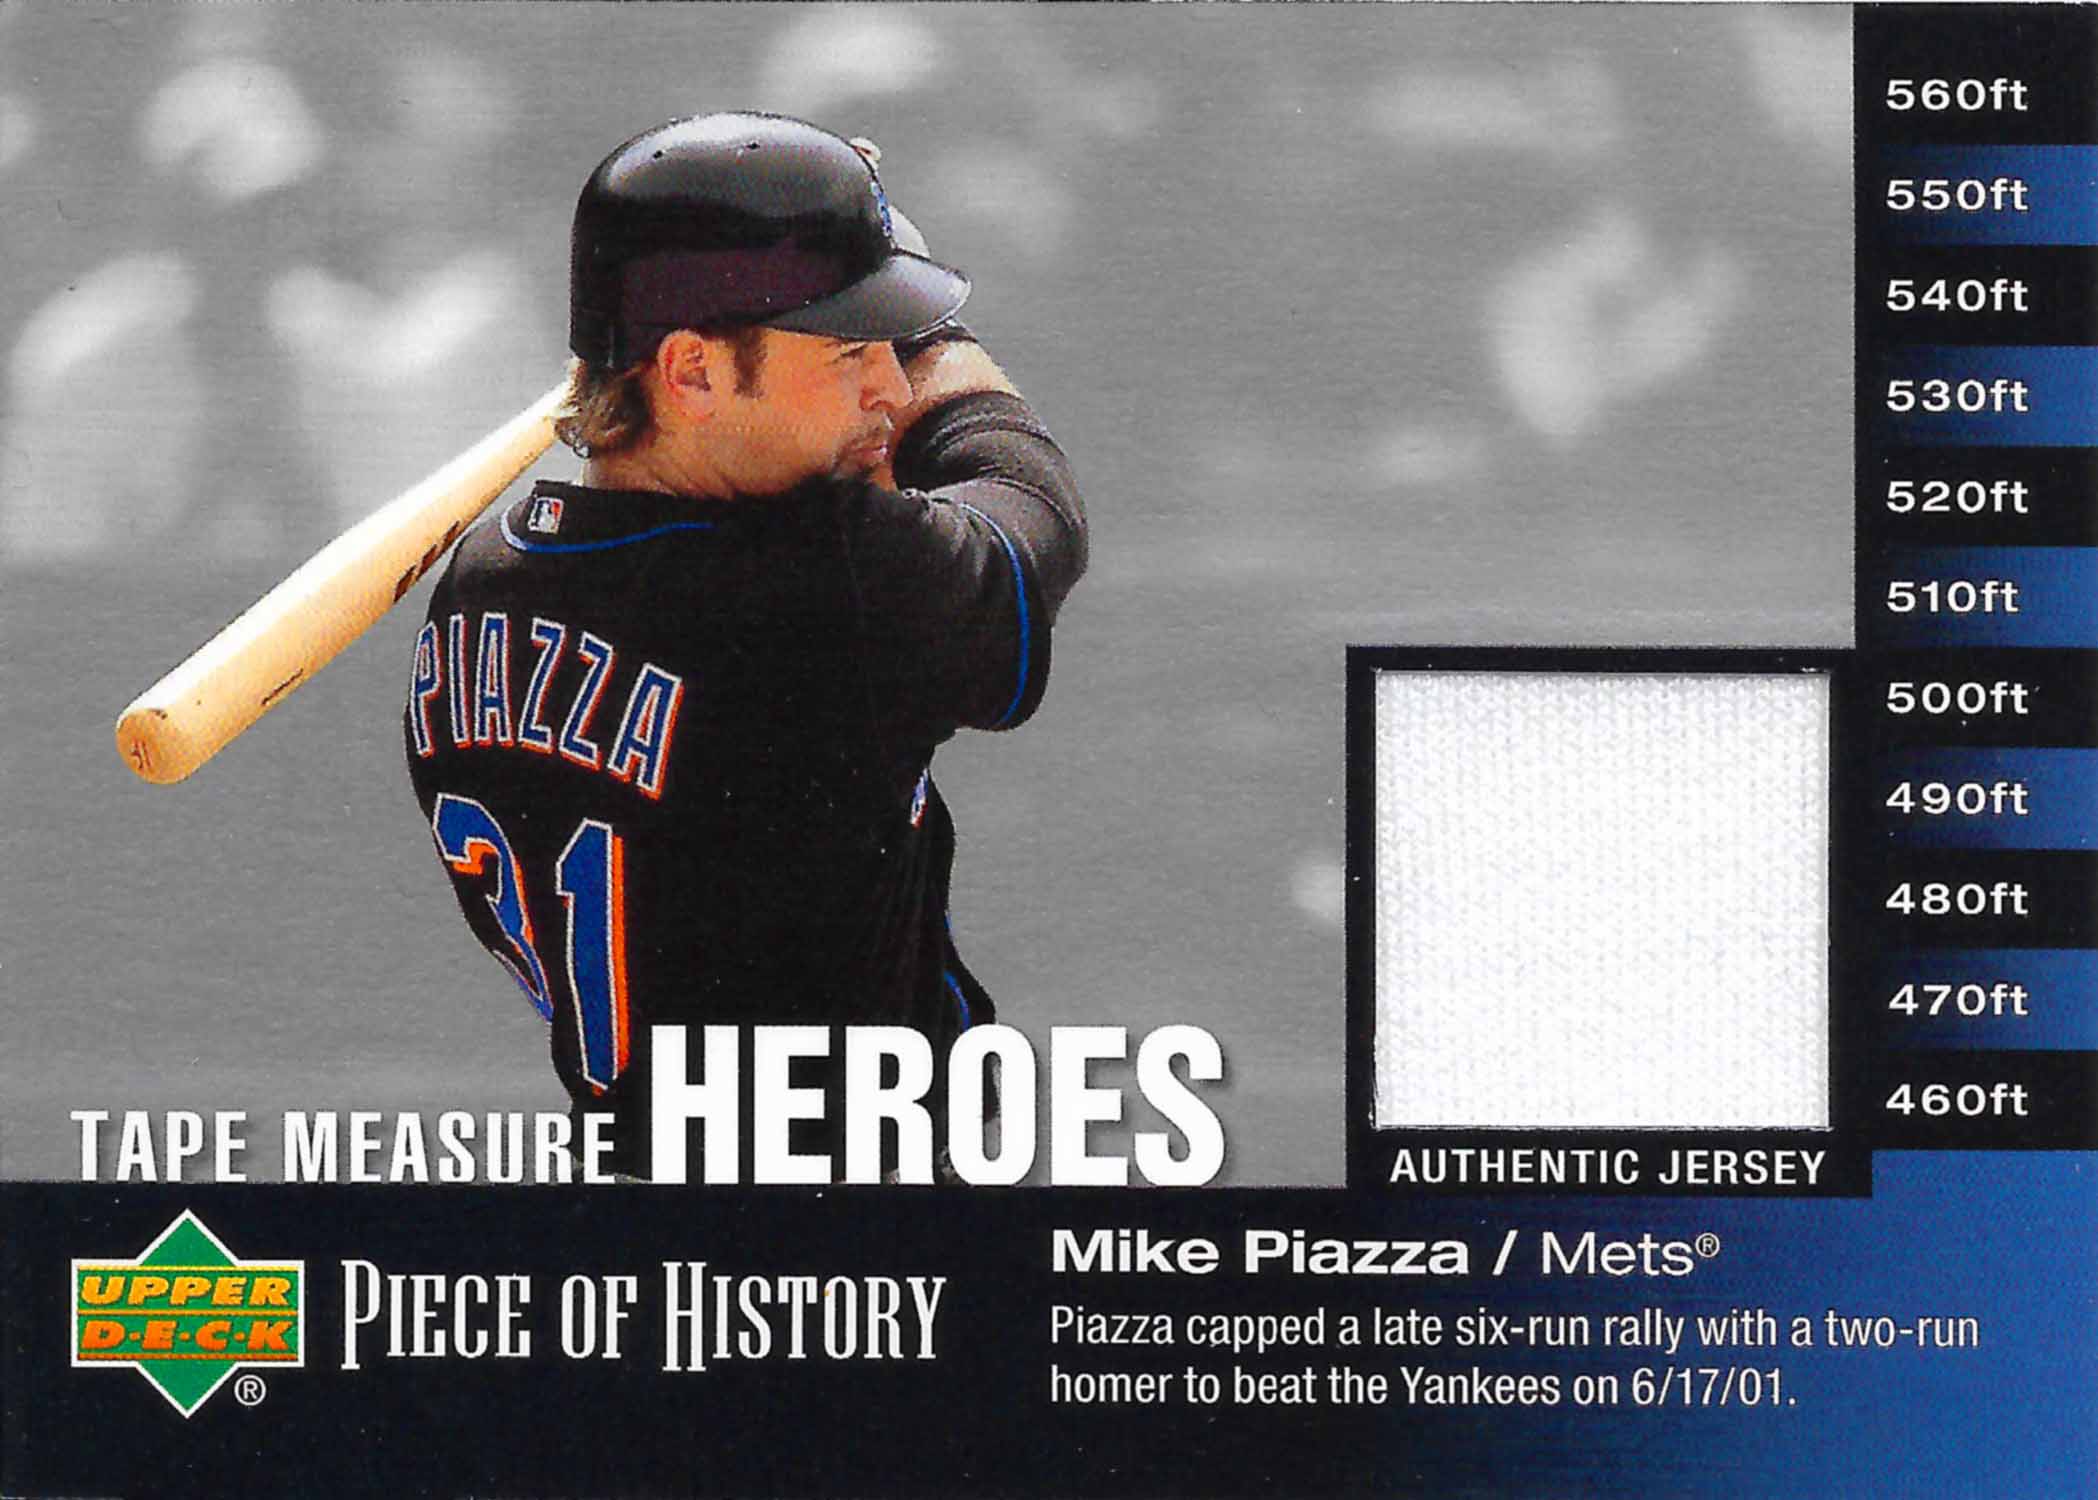 2002 UD Piece of History Tape Measure Heroes Jersey